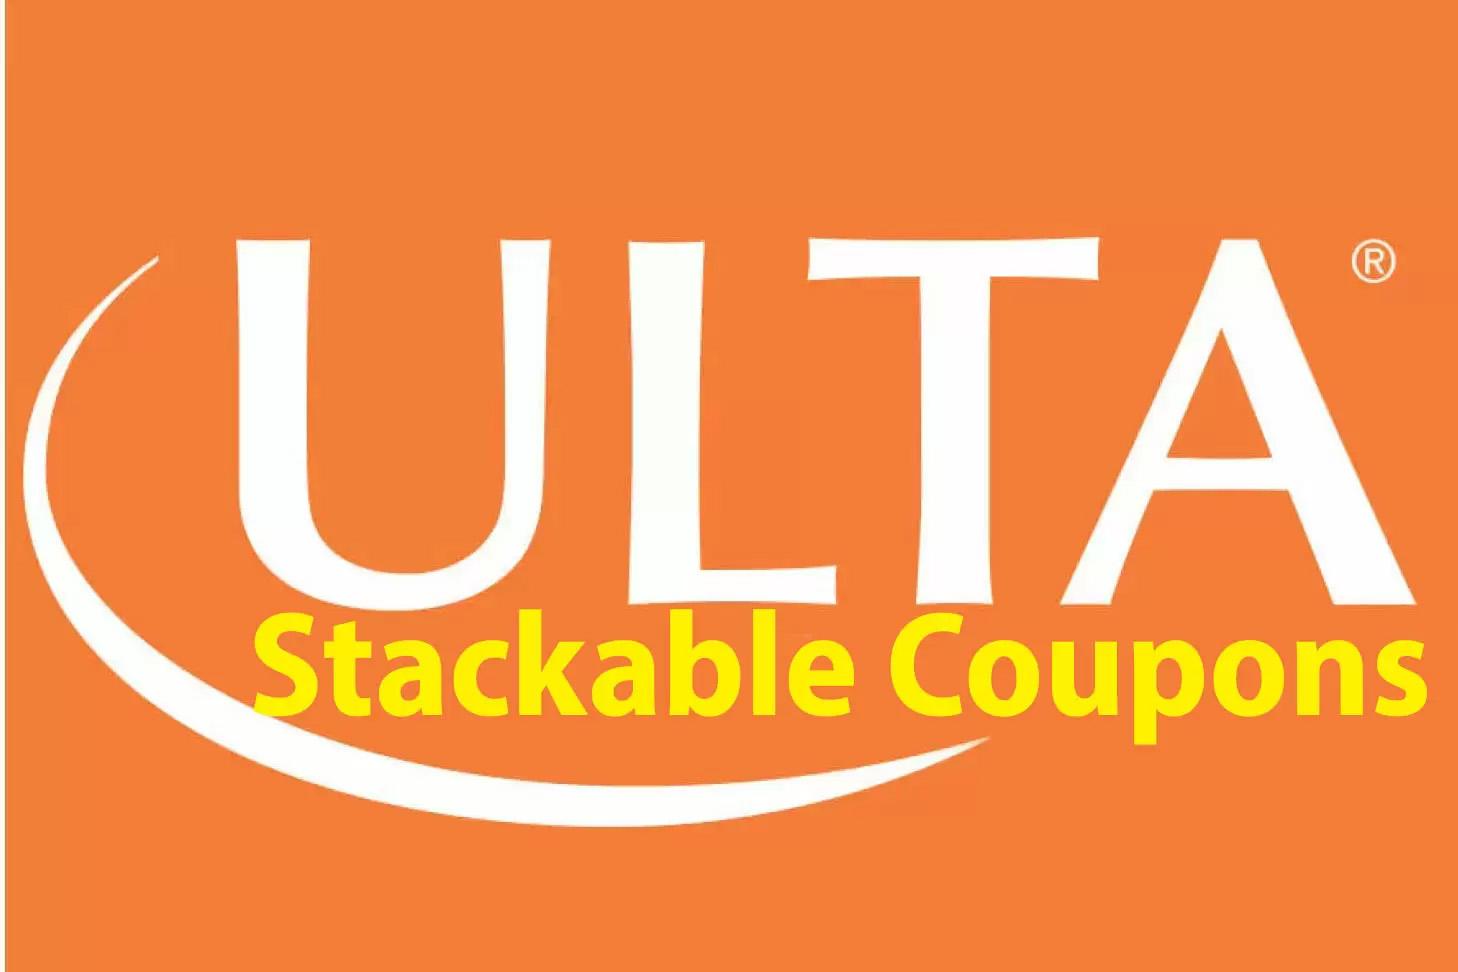 Ulta Beauty Stackable Coupons 20% Off or $5 Off and 3x Points